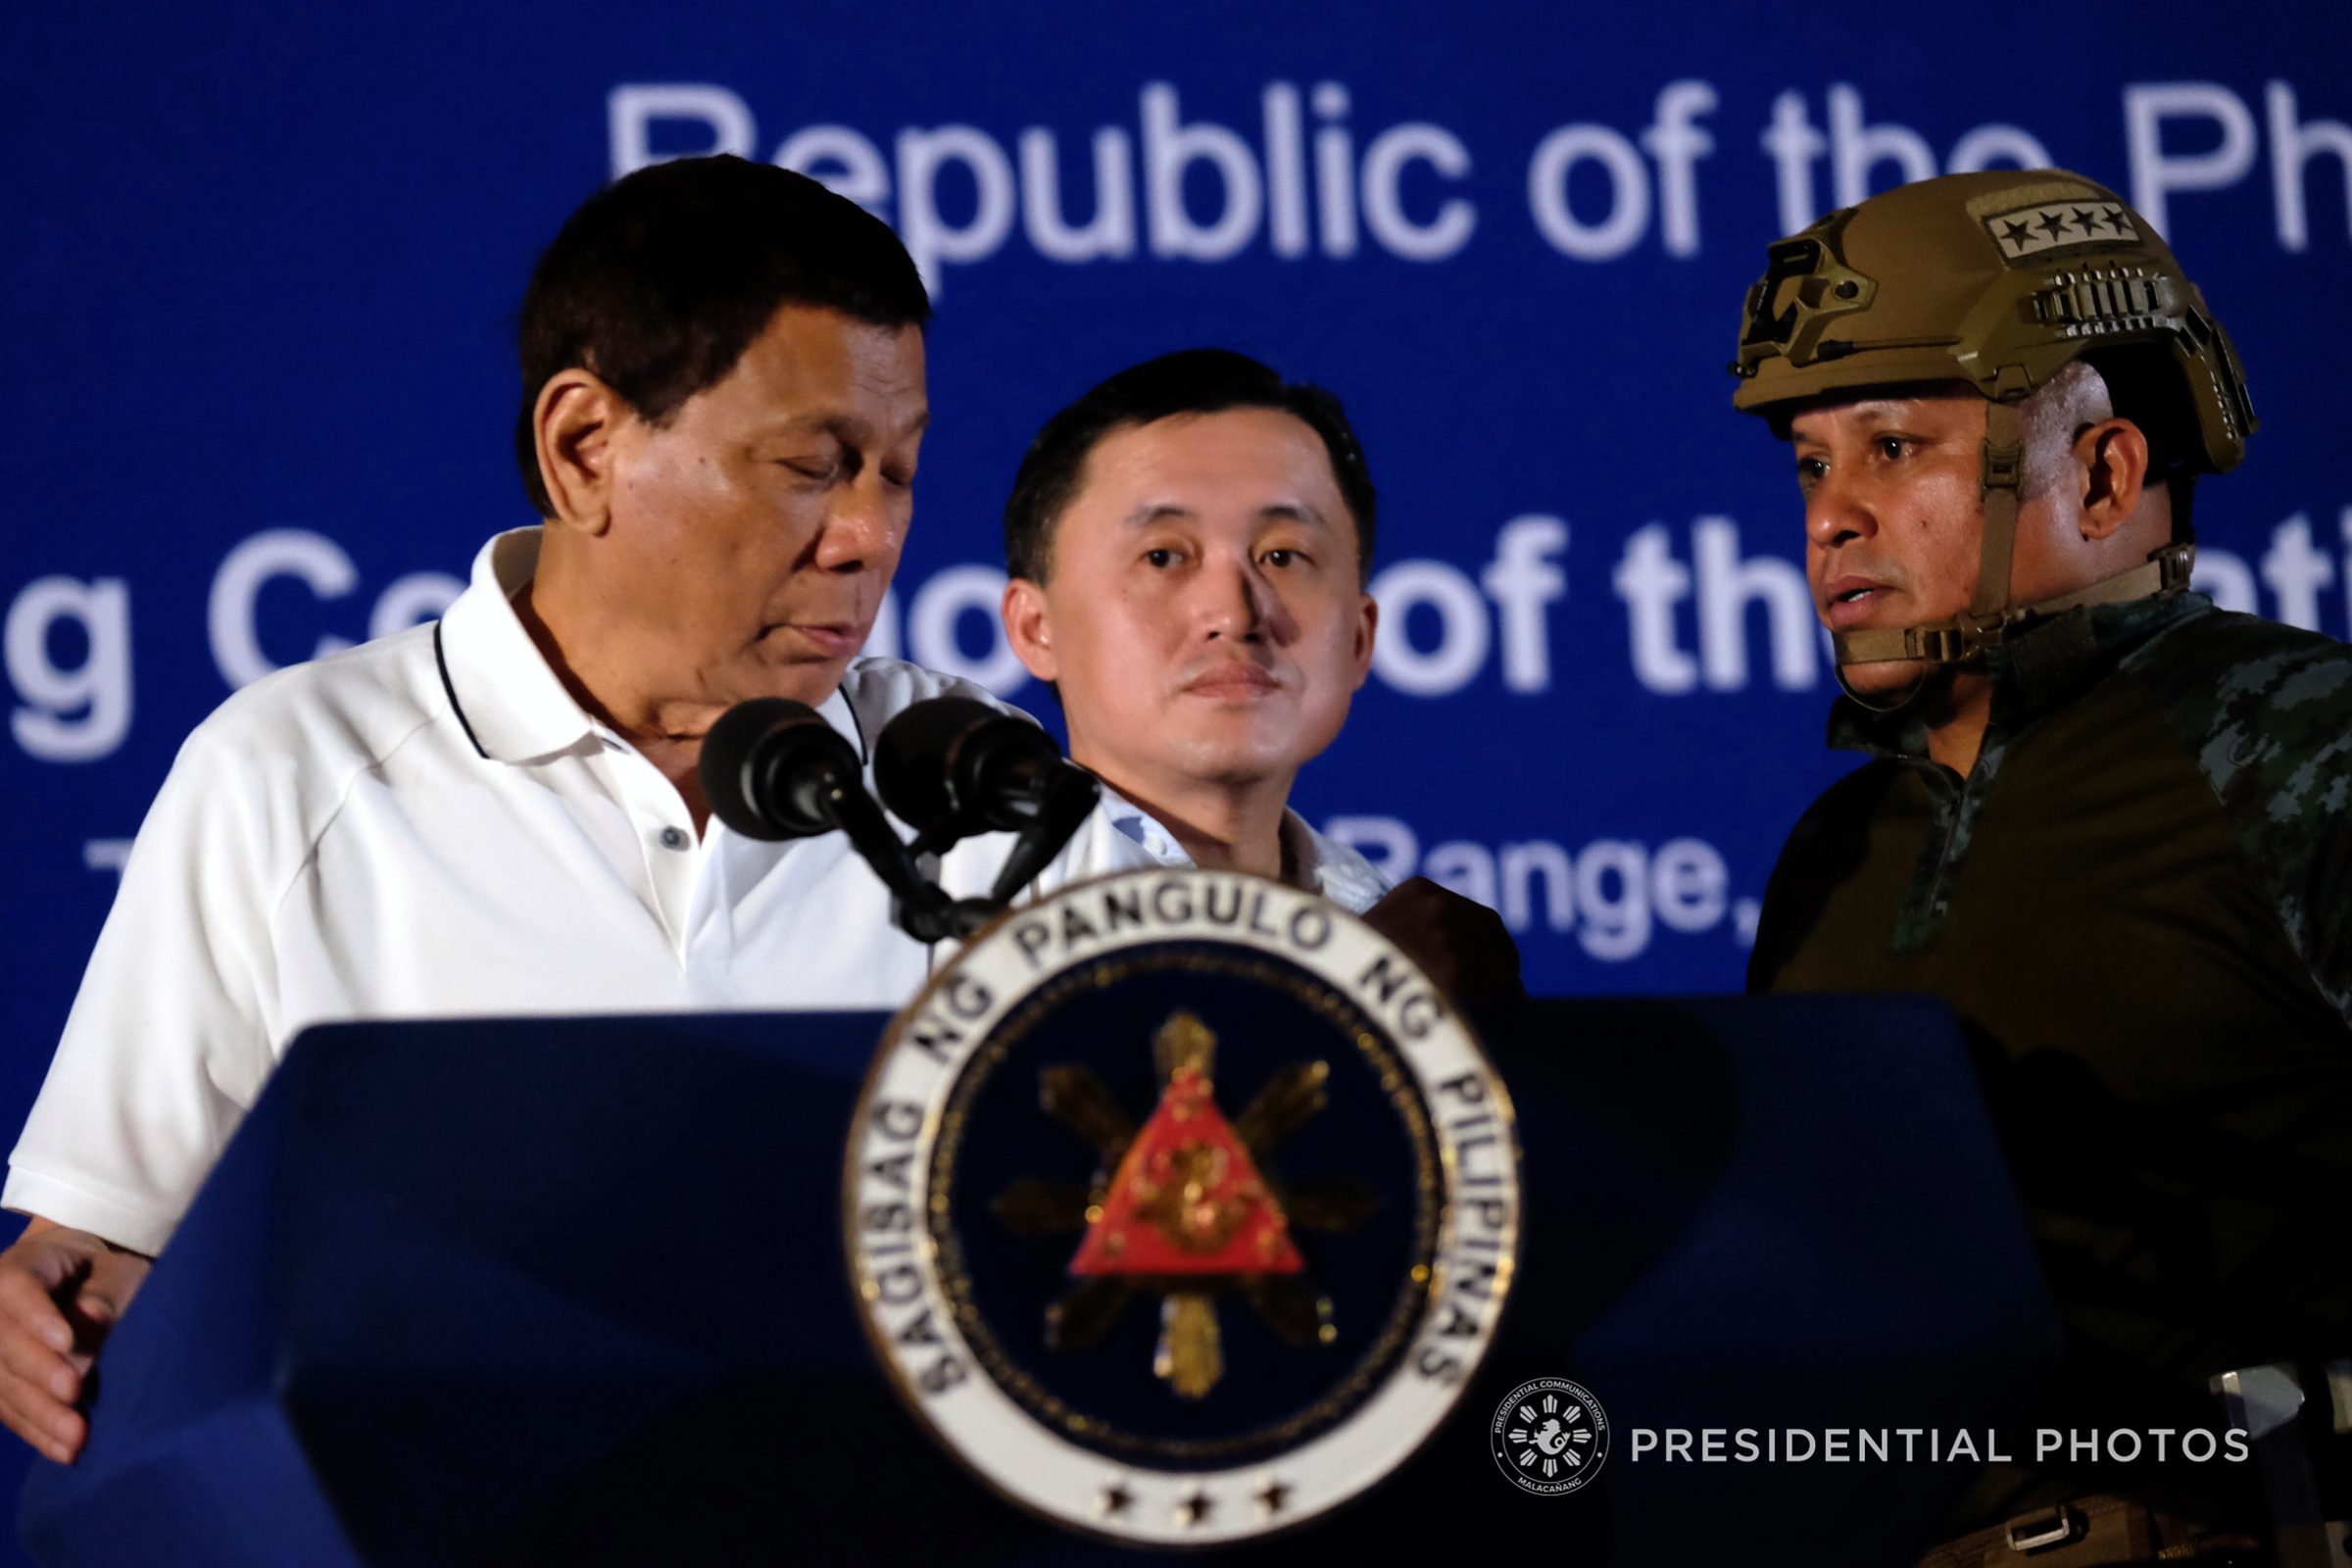 Duterte says he banned Rappler due to ‘twisted’ reporting